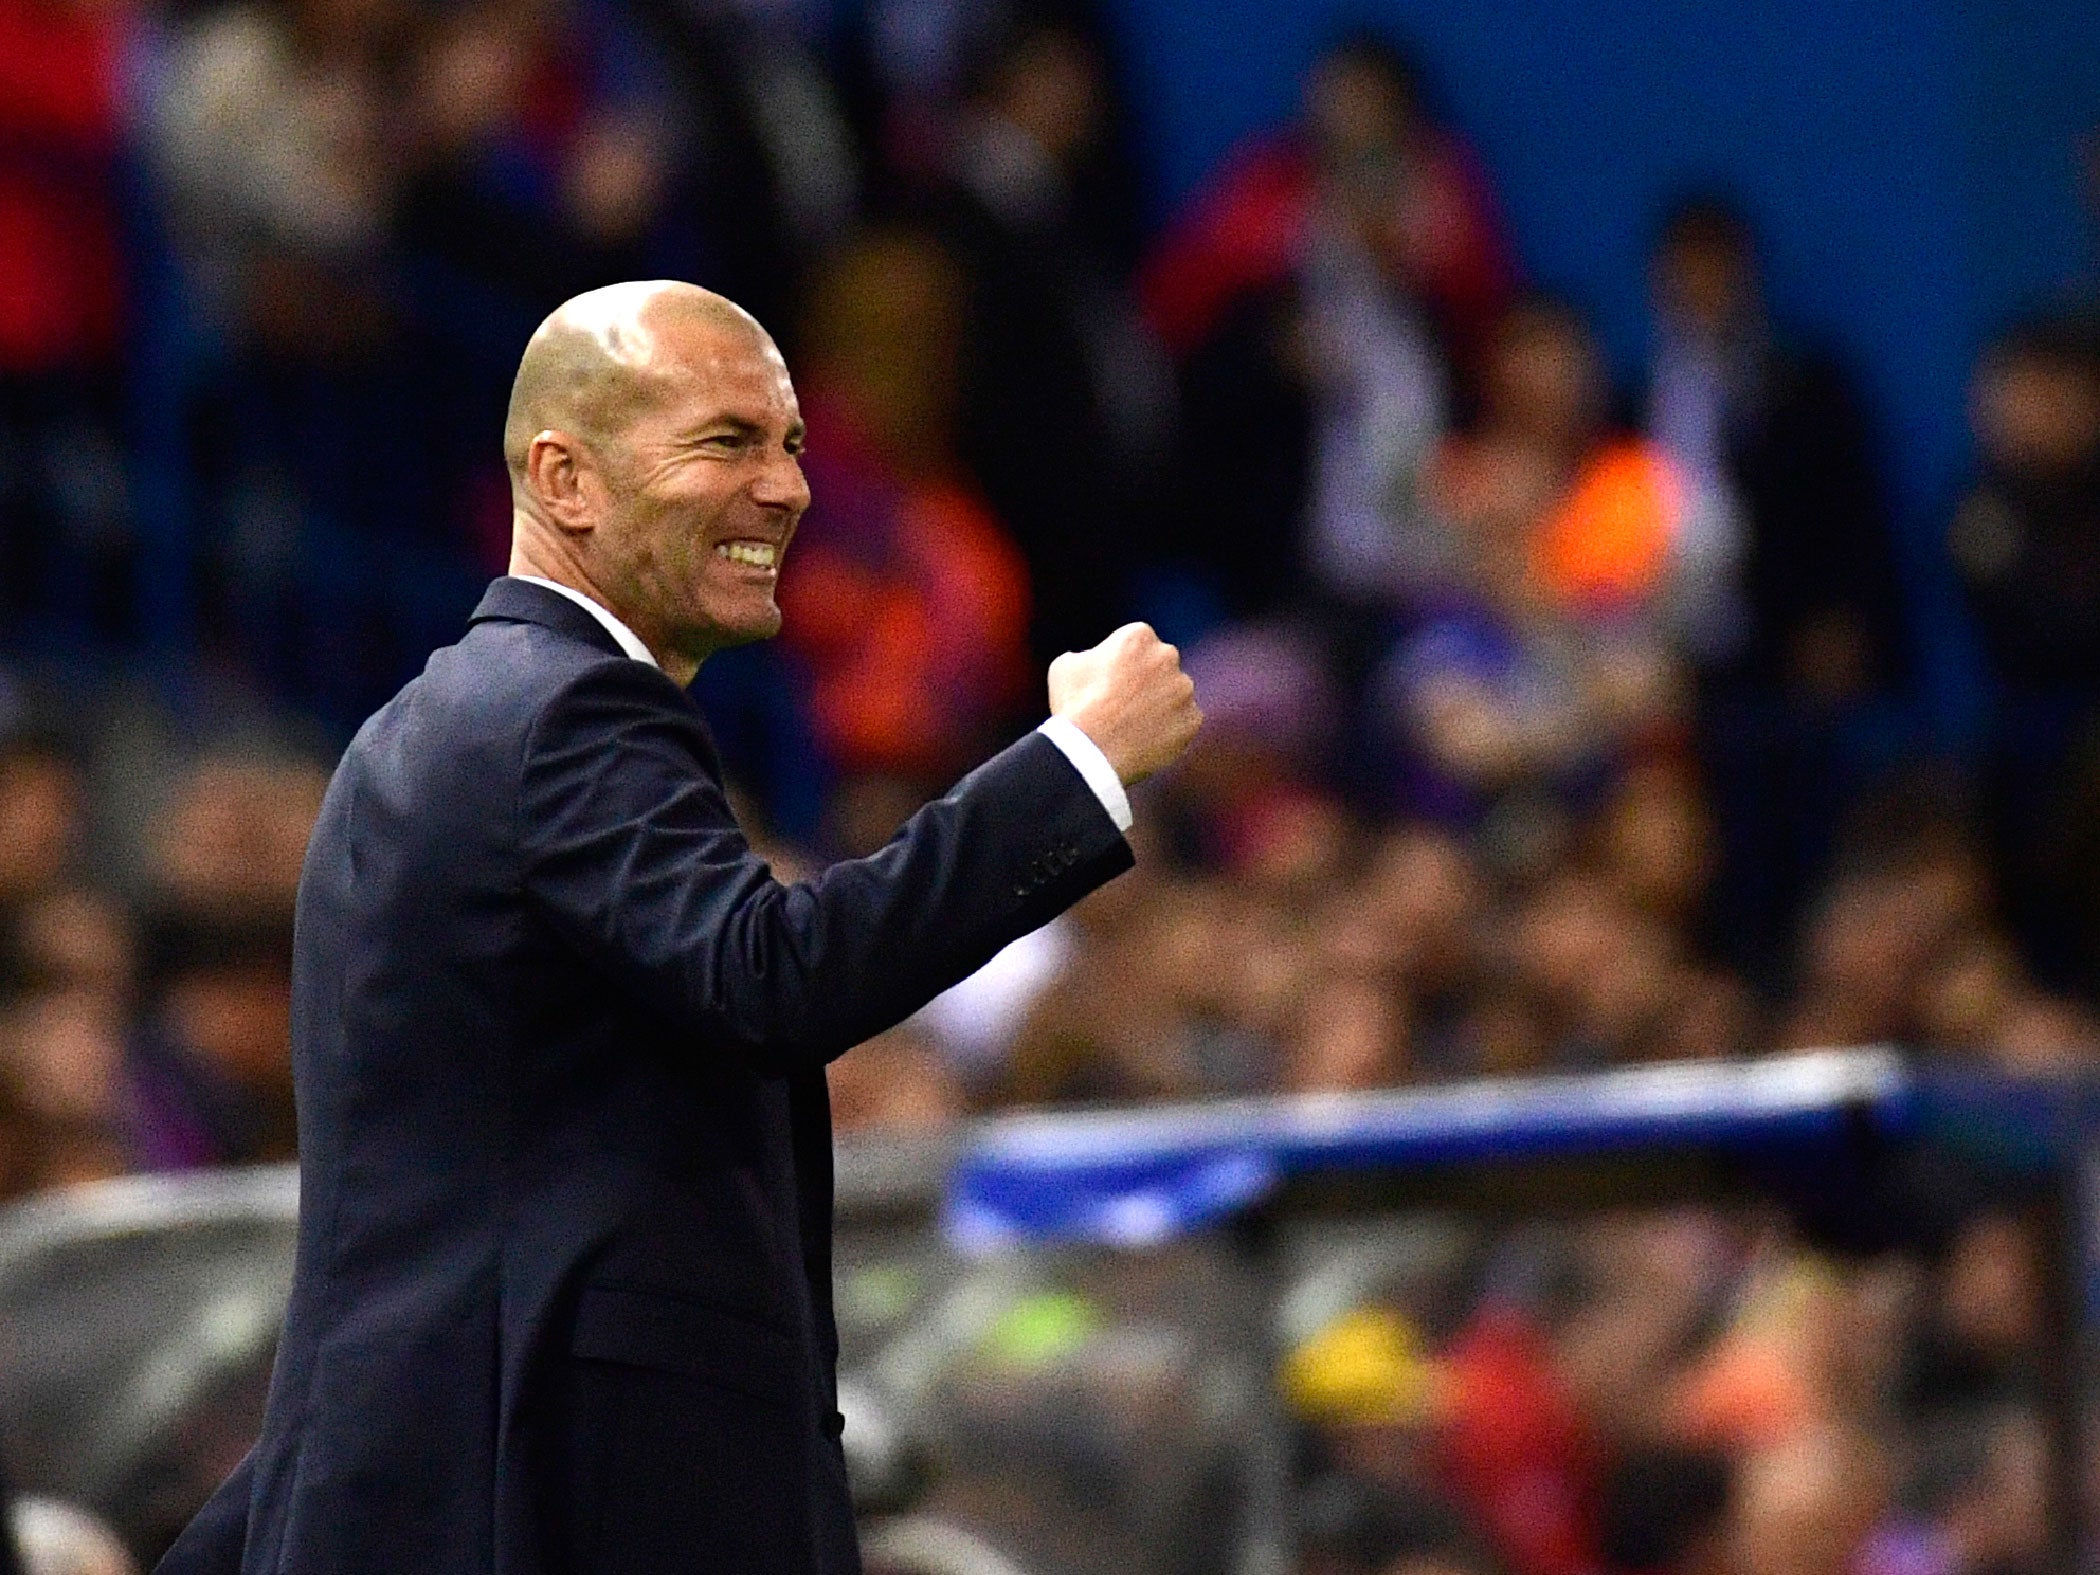 Questions persist if Zidane is actually a good manager